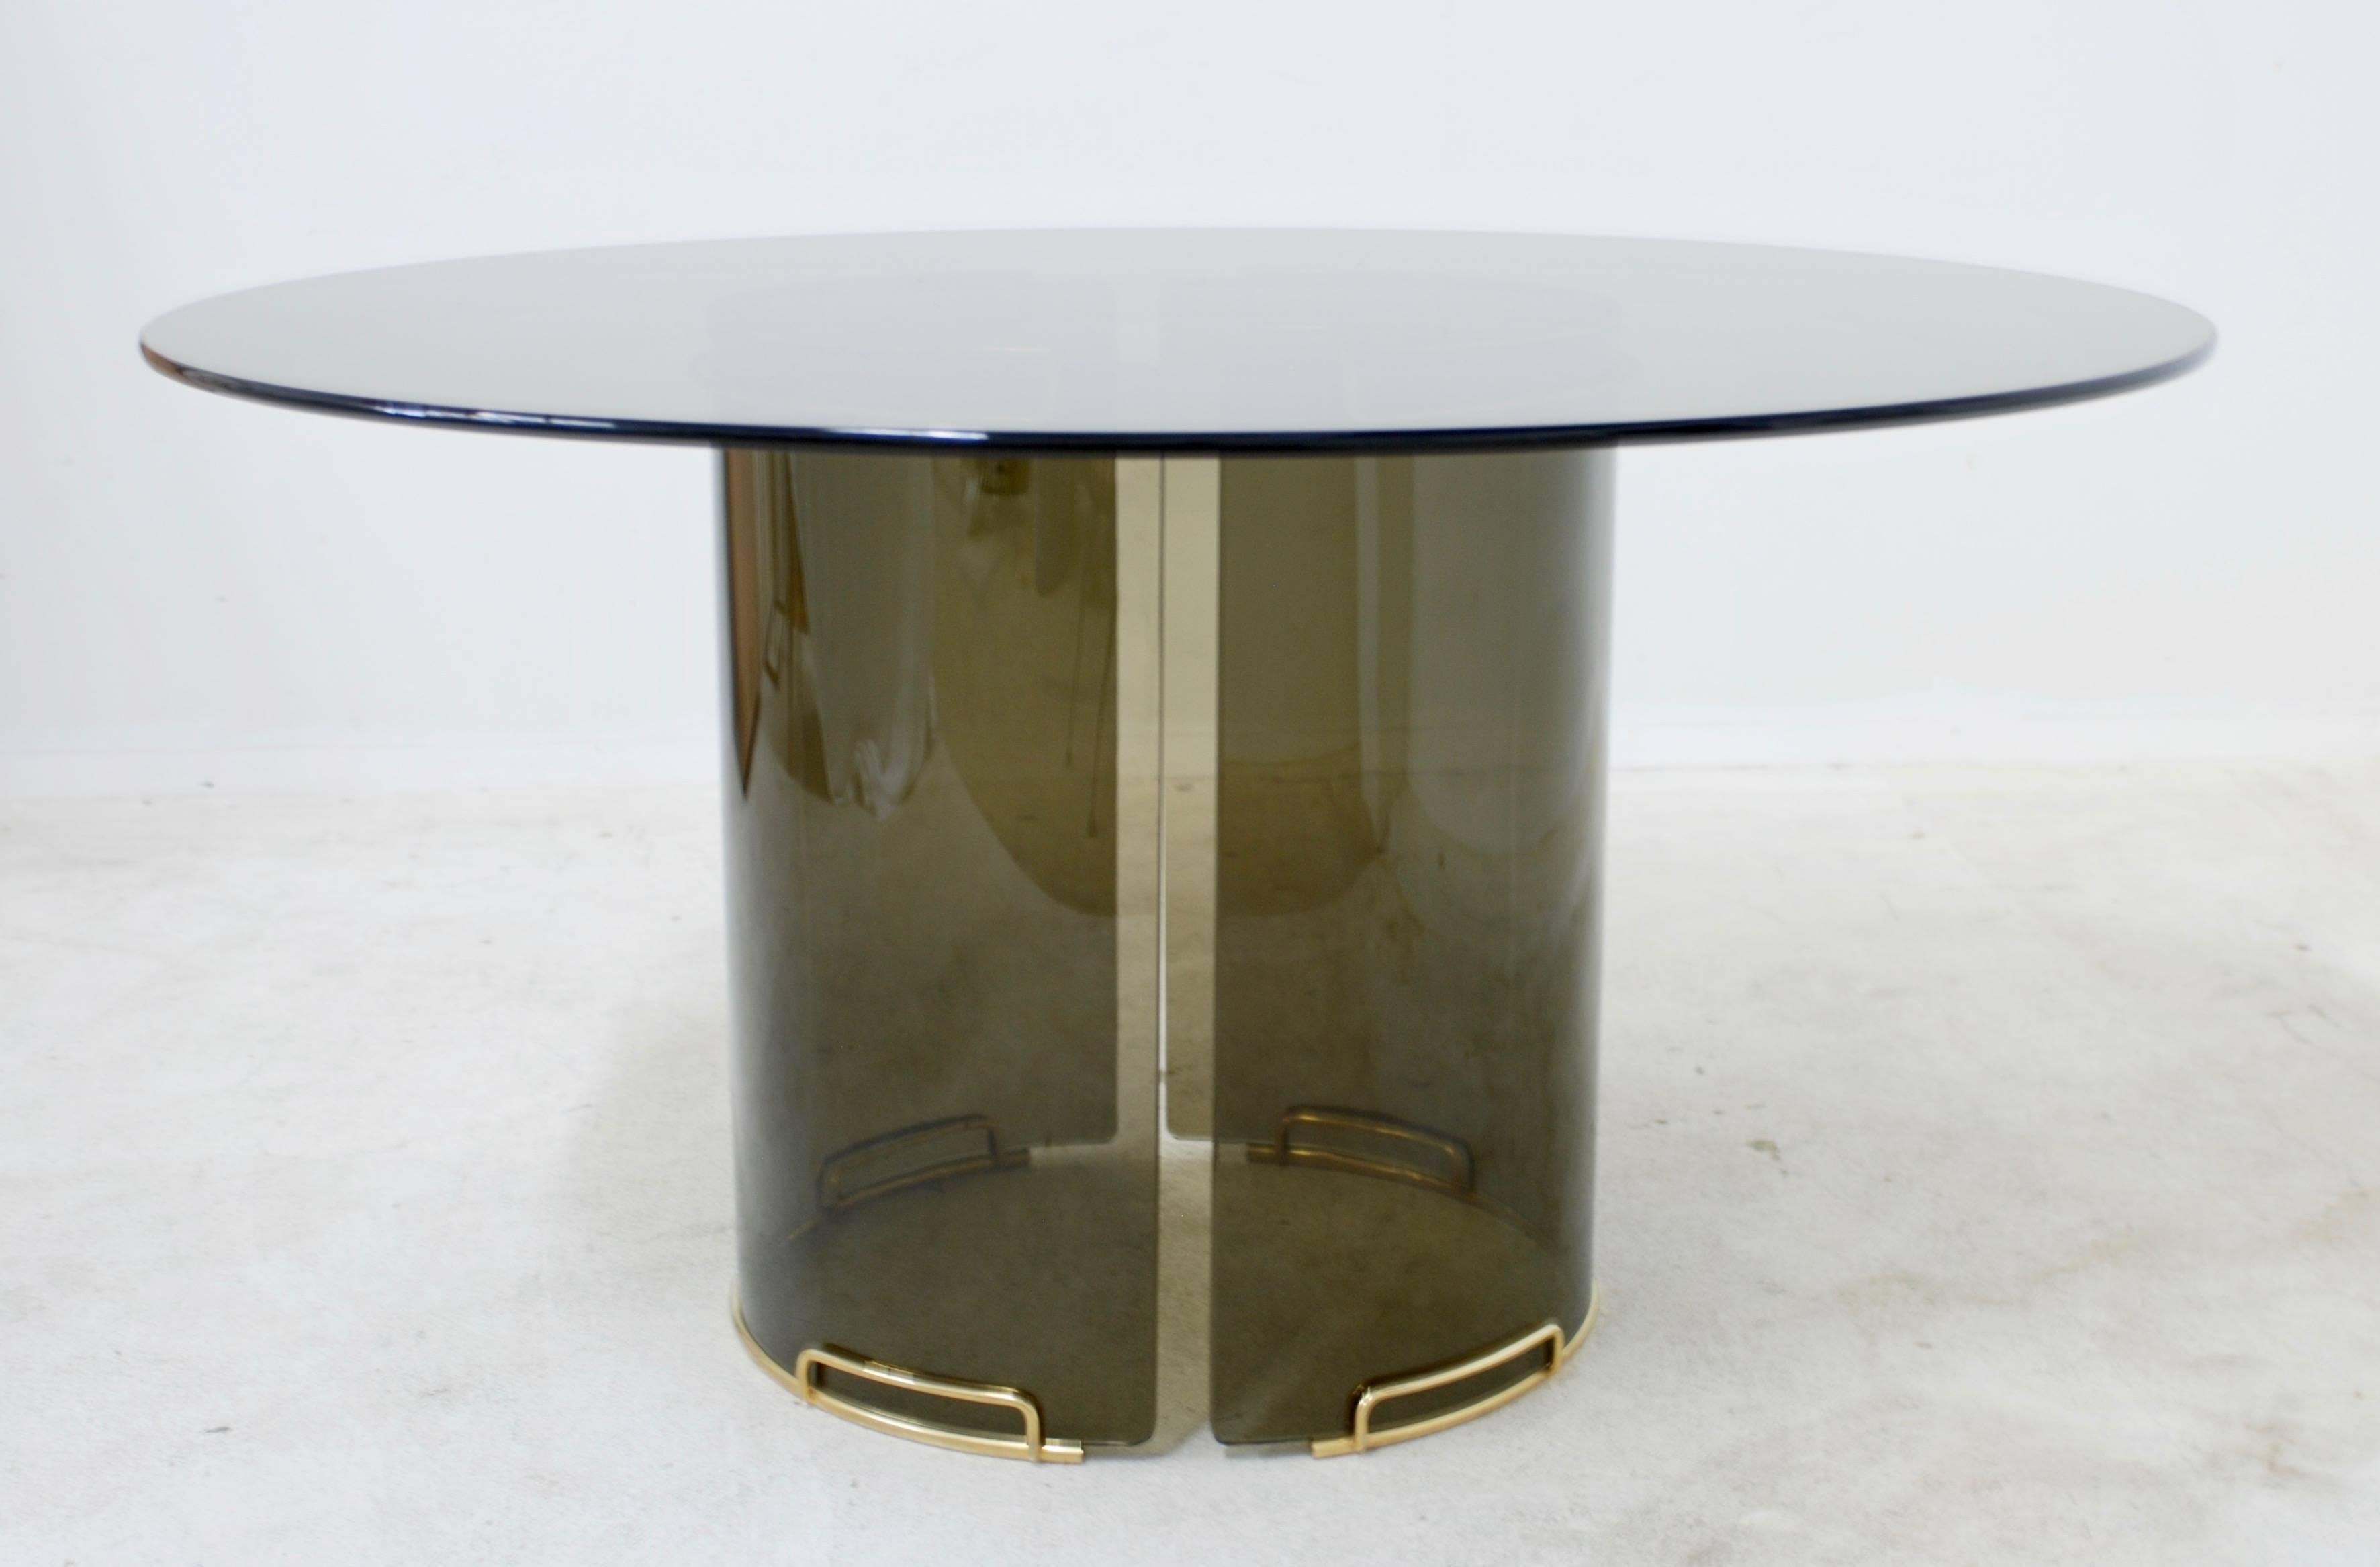 An Italian style 1970s round smoky gray glass dining table which could possibly be the work of Fontana Arte. The base is made of two pieces of curved glass that have chic brass fittings on the base and top. The bases measure 28.25